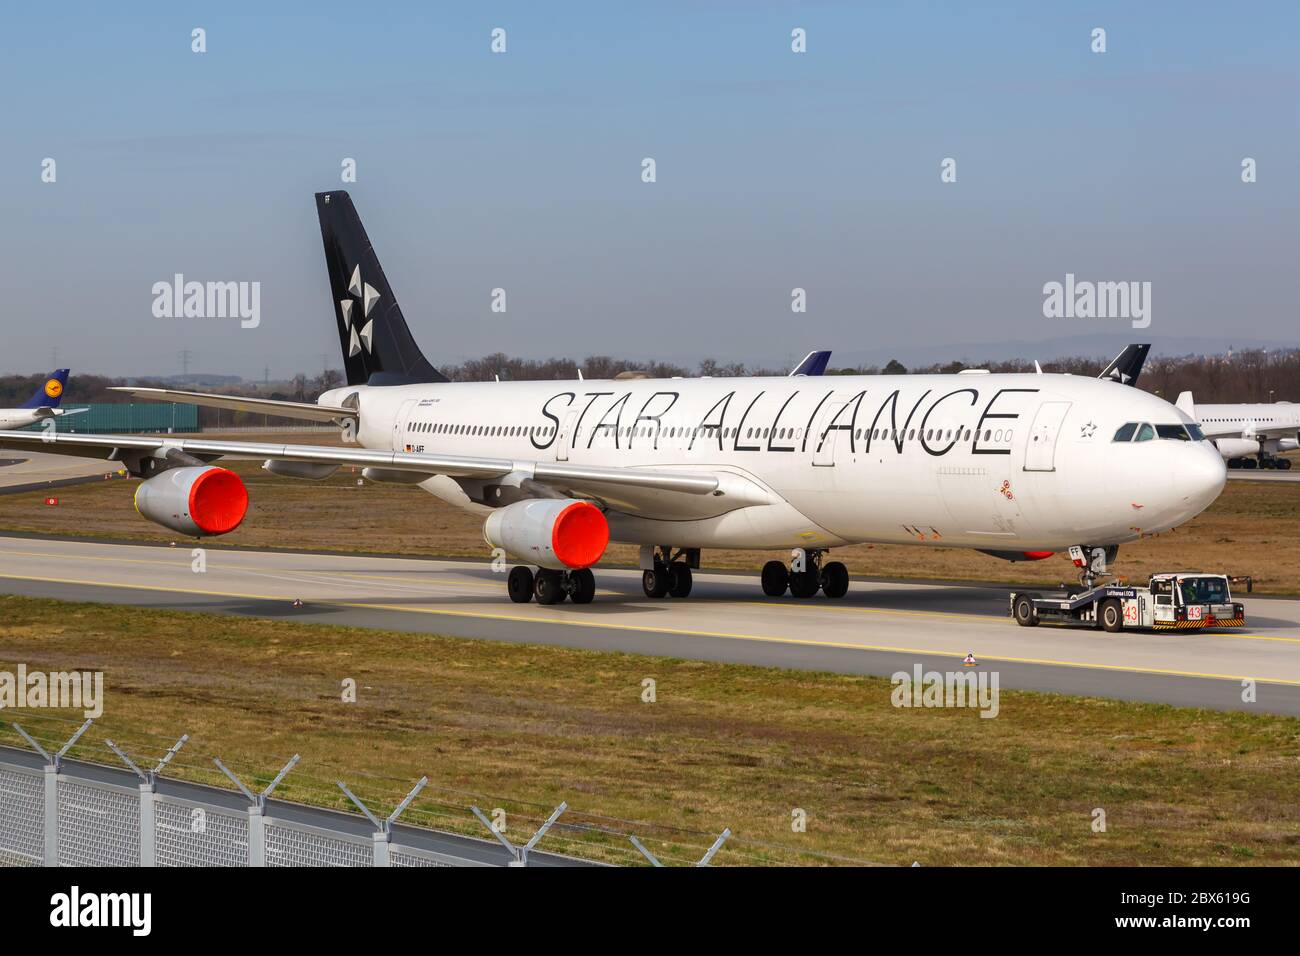 Frankfurt, Germany April 7, 2020: Lufthansa Airbus A340-300 airplane Frankfurt airplane at Frankfurt airport FRA in Germany. Airbus is a European airc Stock Photo